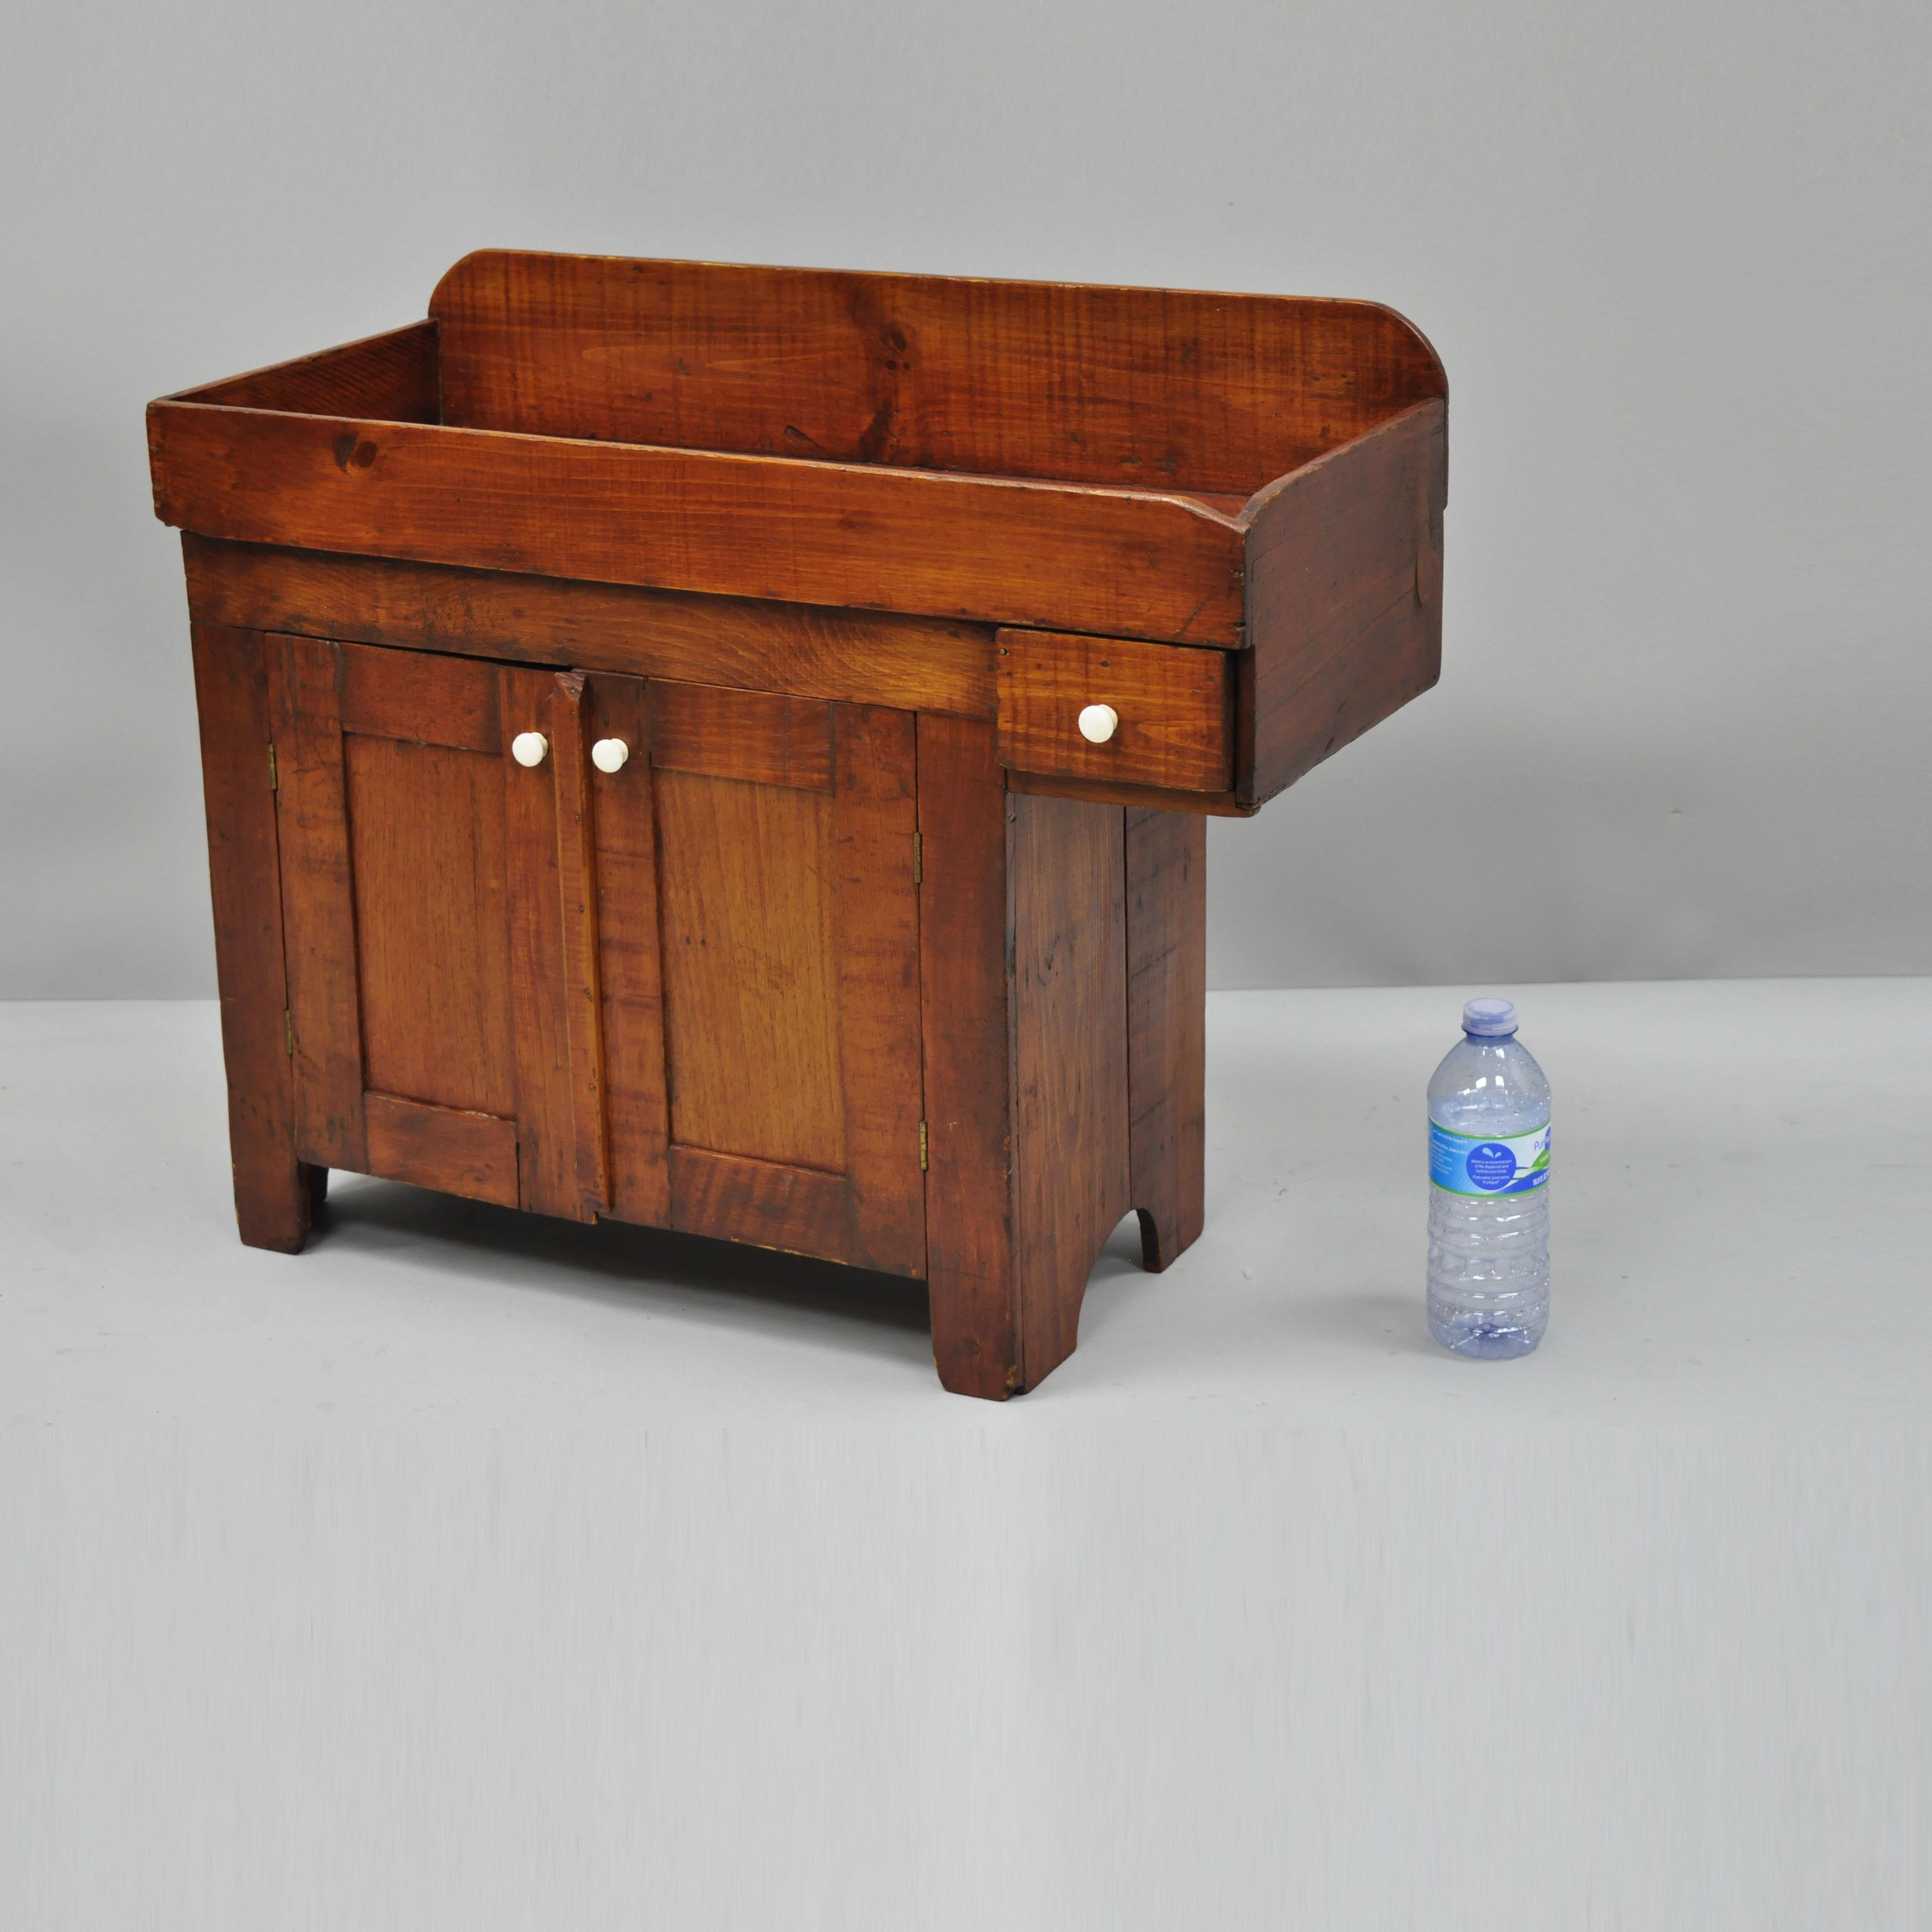 Miniature salesman sample 19th century American dry sink cabinet. Item features solid wood construction, beautiful wood grain, 2 swing doors, 1 drawer, very nice antique item, quality American craftsmanship, circa early 19th century. Measurements: